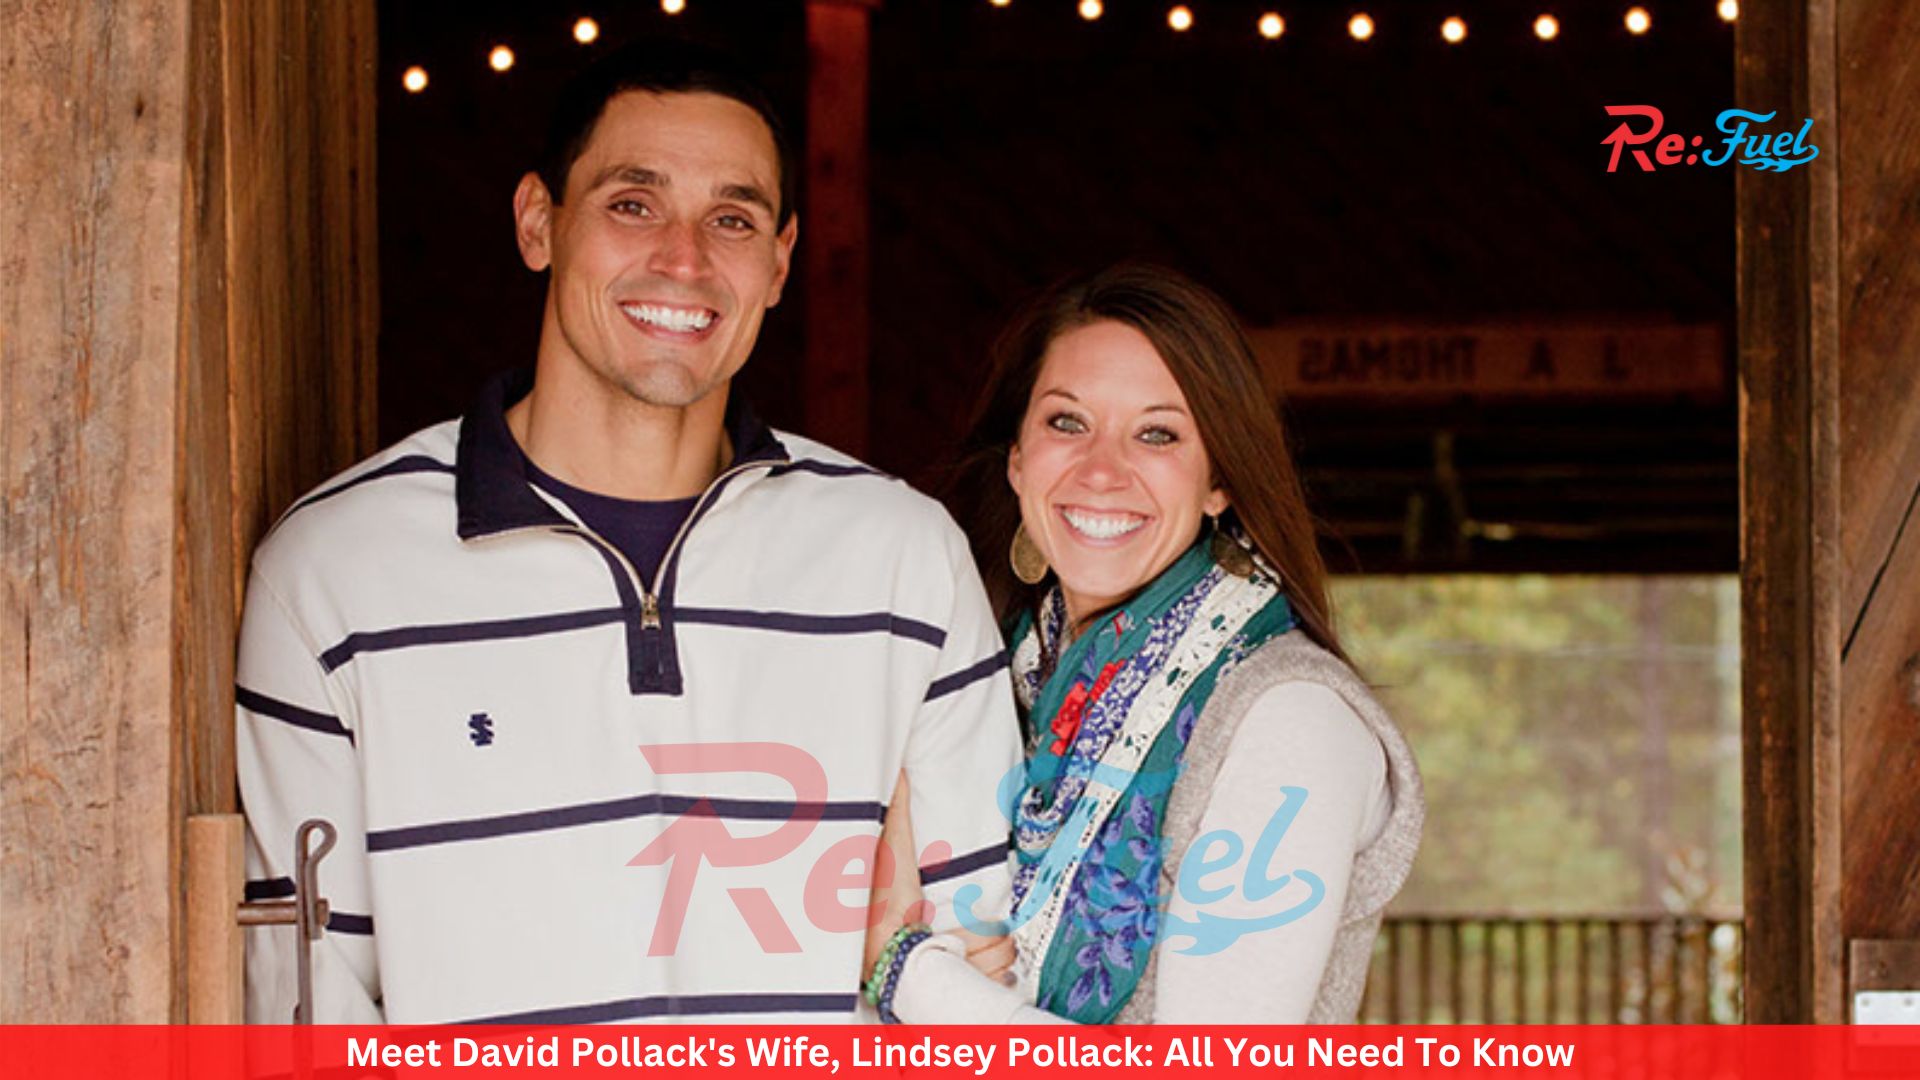 Meet David Pollack's Wife, Lindsey Pollack: All You Need To Know